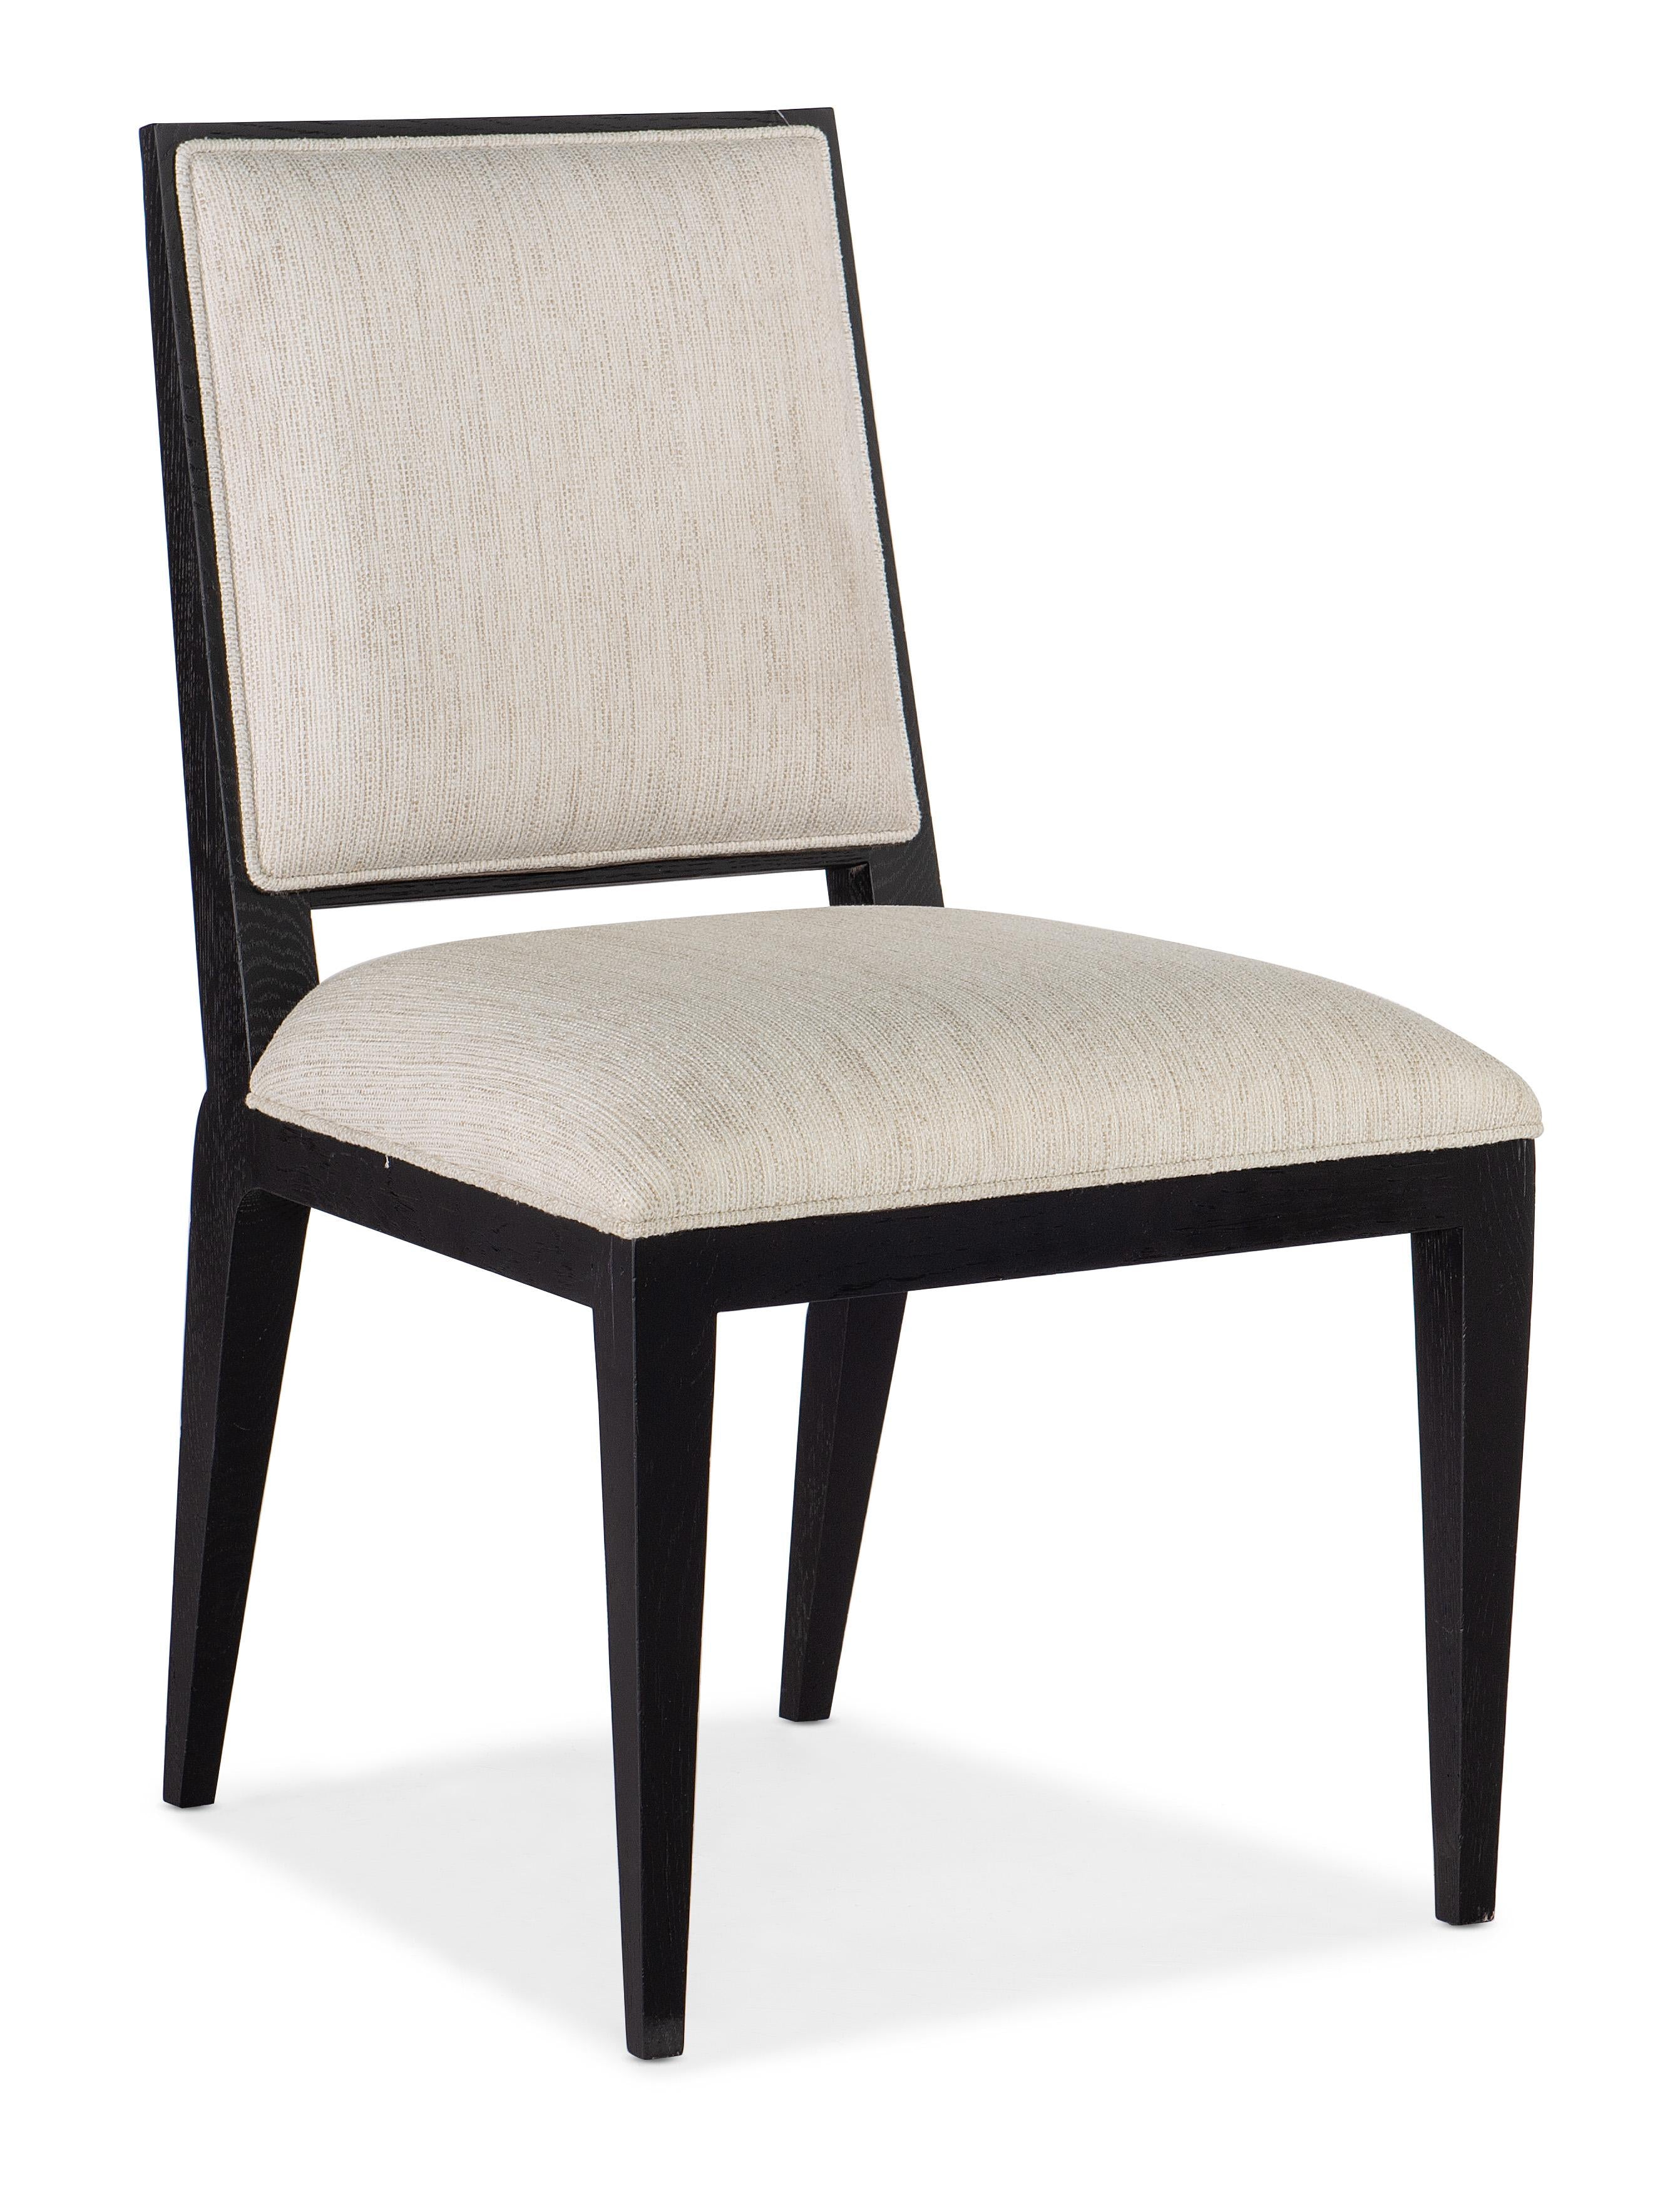 Linville Falls Linn Cove Upholstered Side Chair-2 per carton/pric image